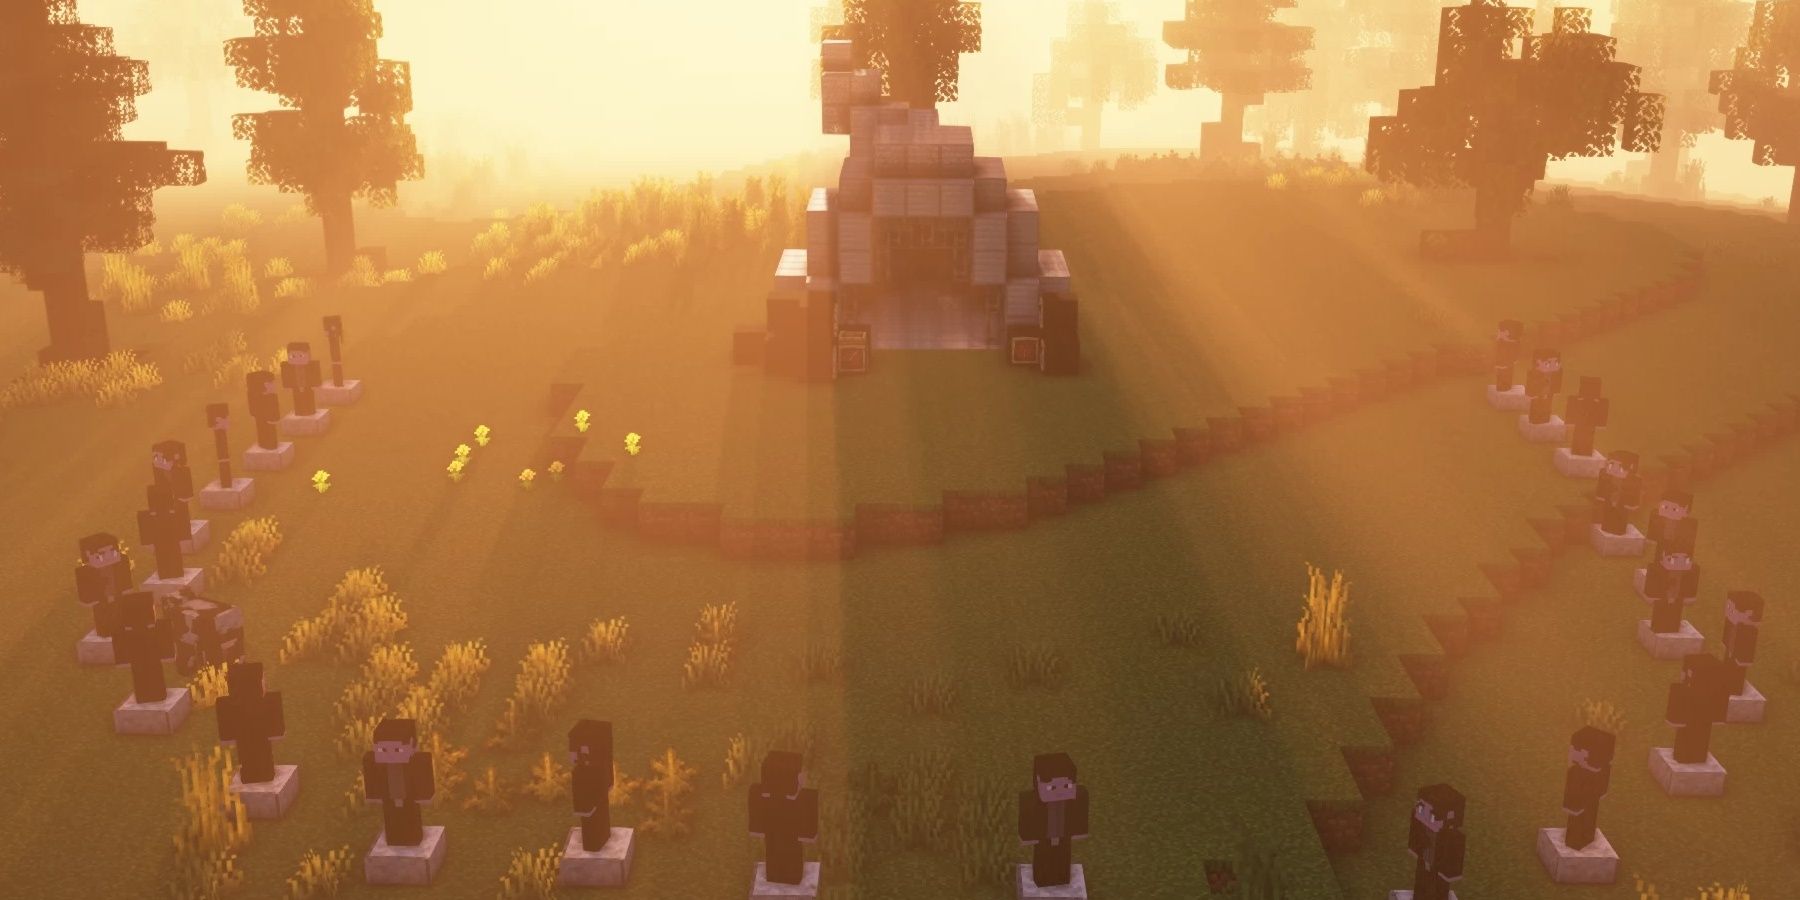 Minecraft Mod The Hunger Games Players Standing Around The Cornucopia At Sunrise